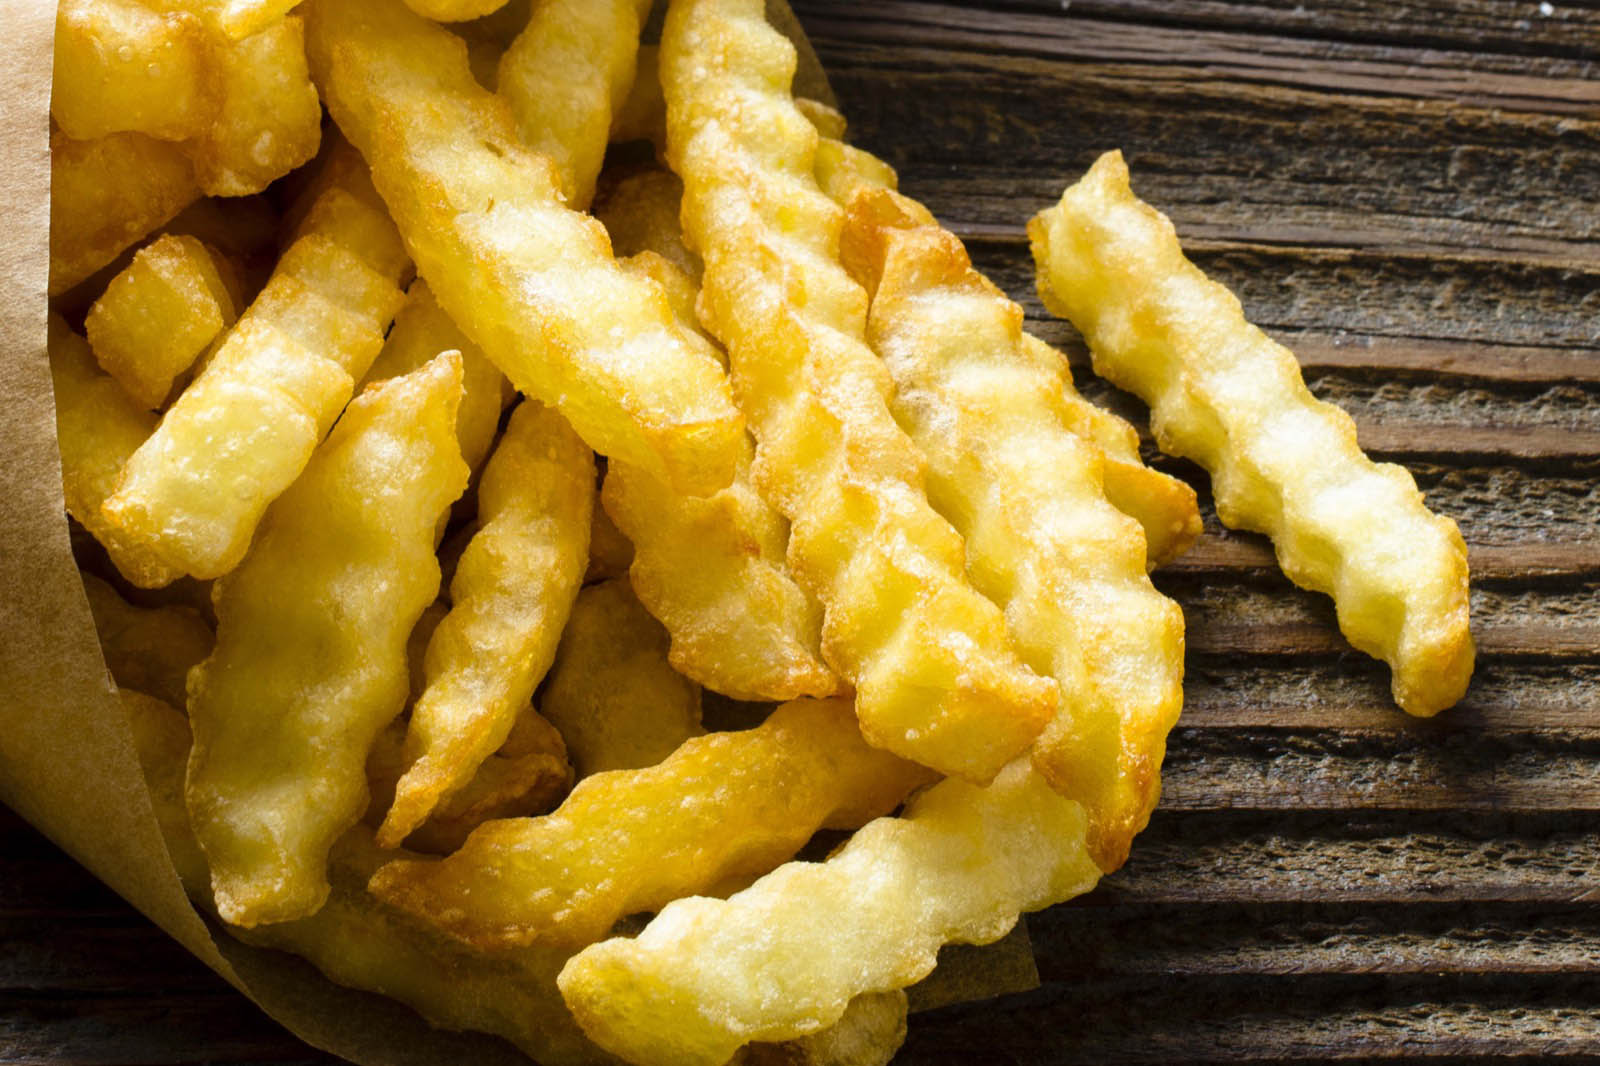 🍟 Believe It or Not, We Can Guess Your Age Just by How You Rate These Potato Dishes Crinkle cut fries